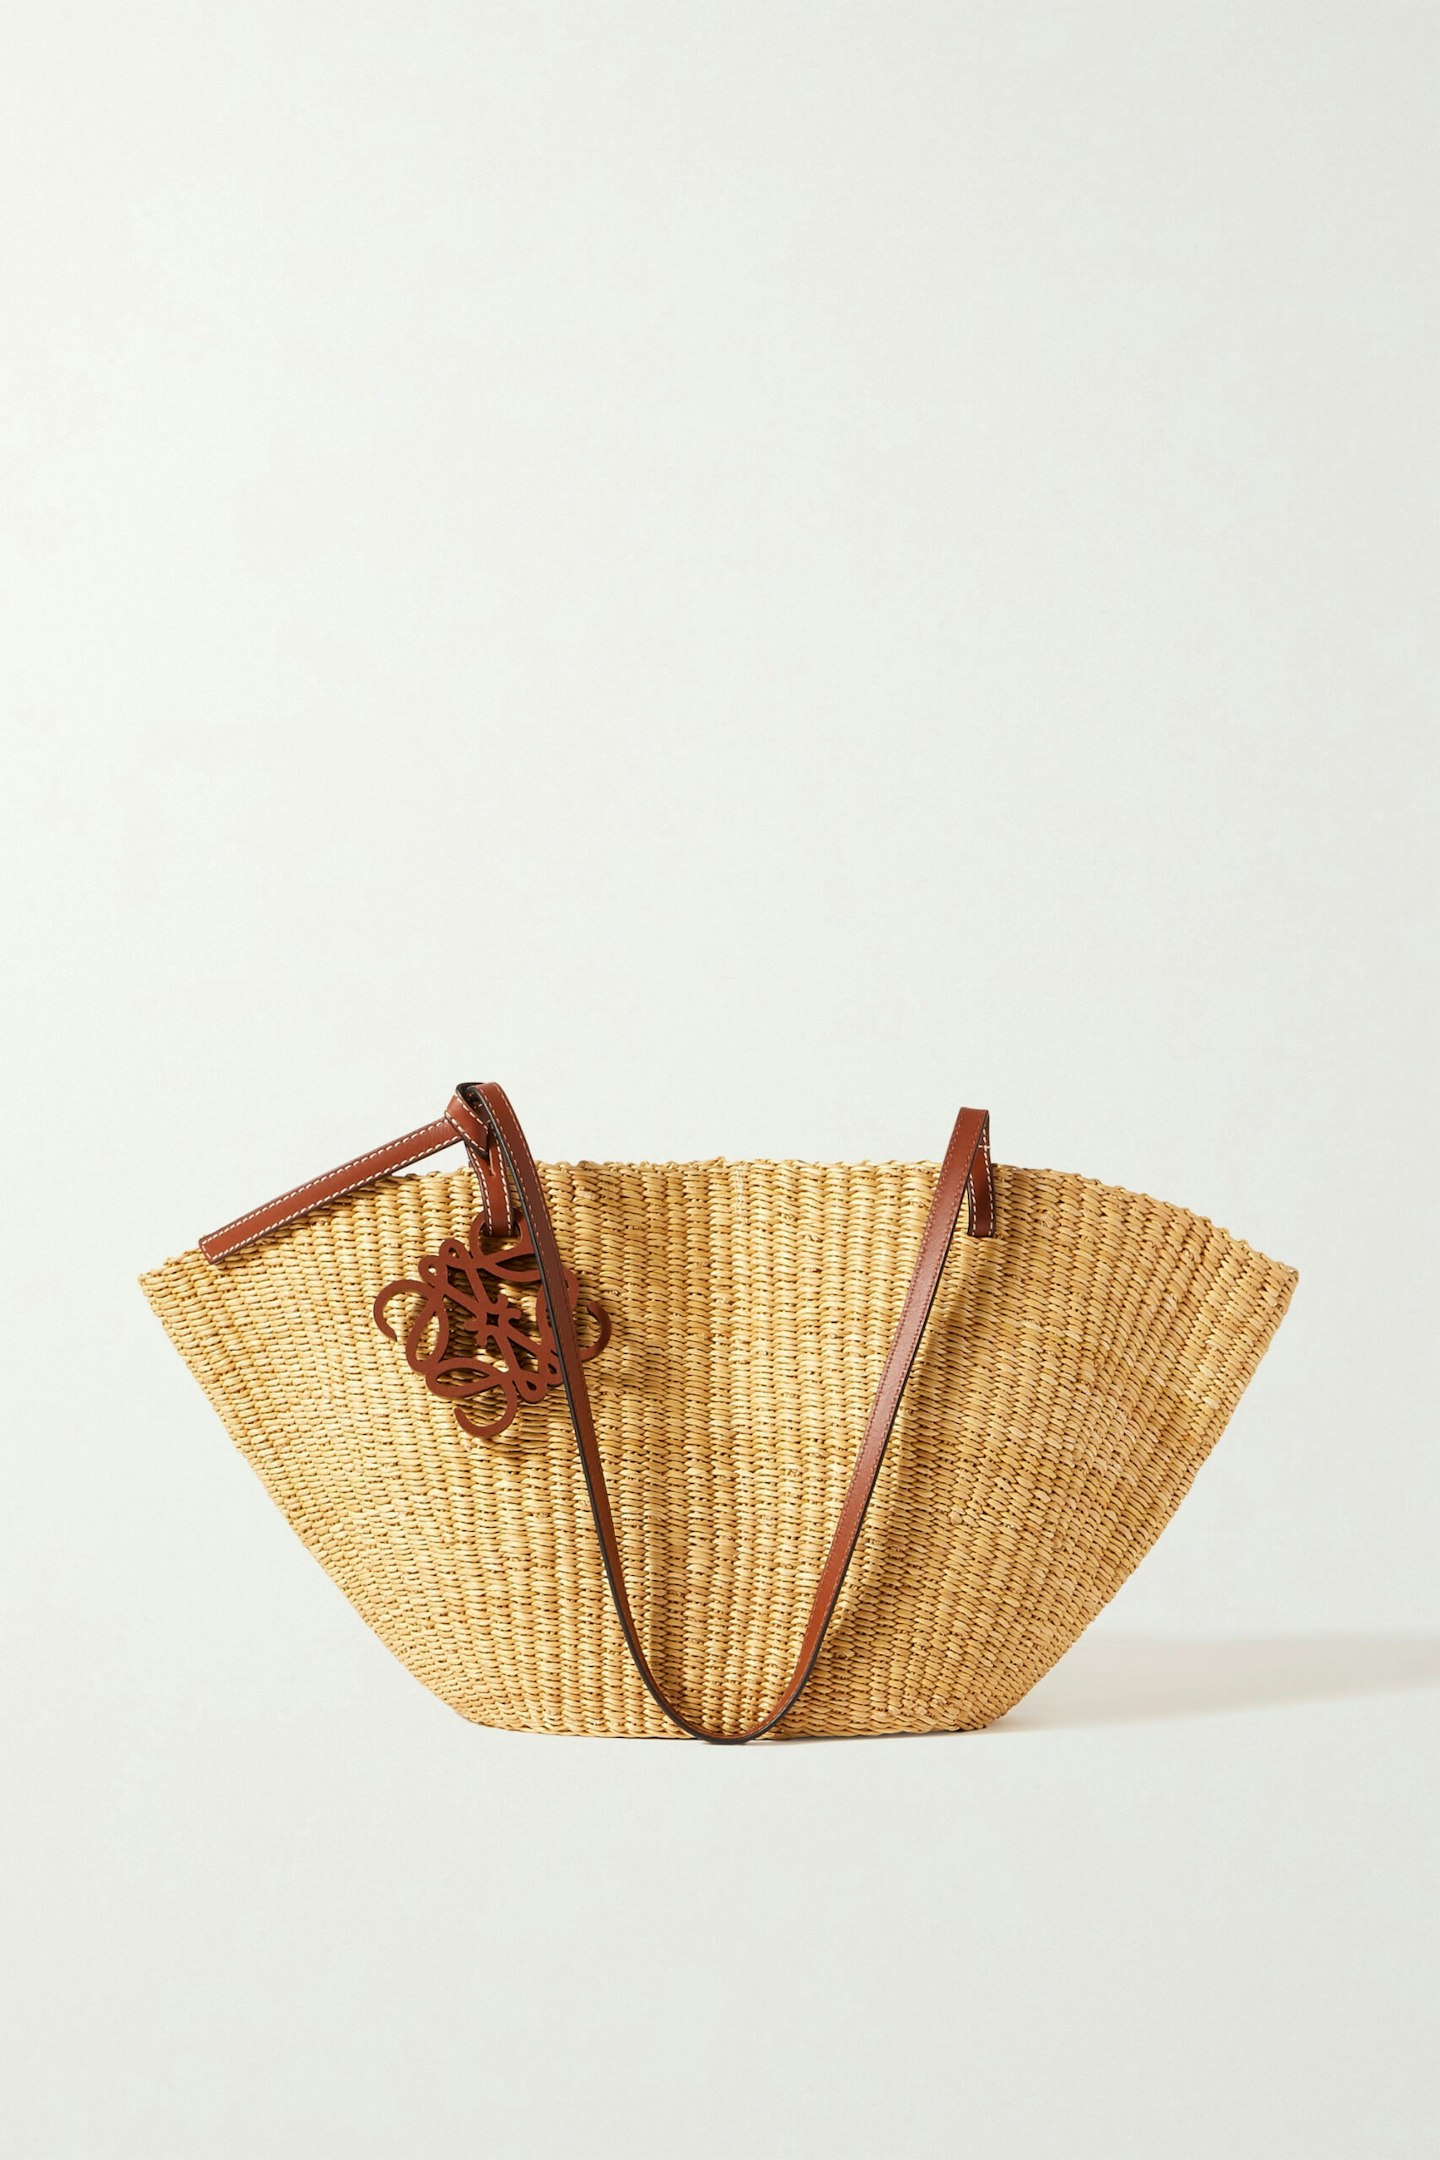 Loewe, Shell Small Leather-Trimmed Raffia Tote